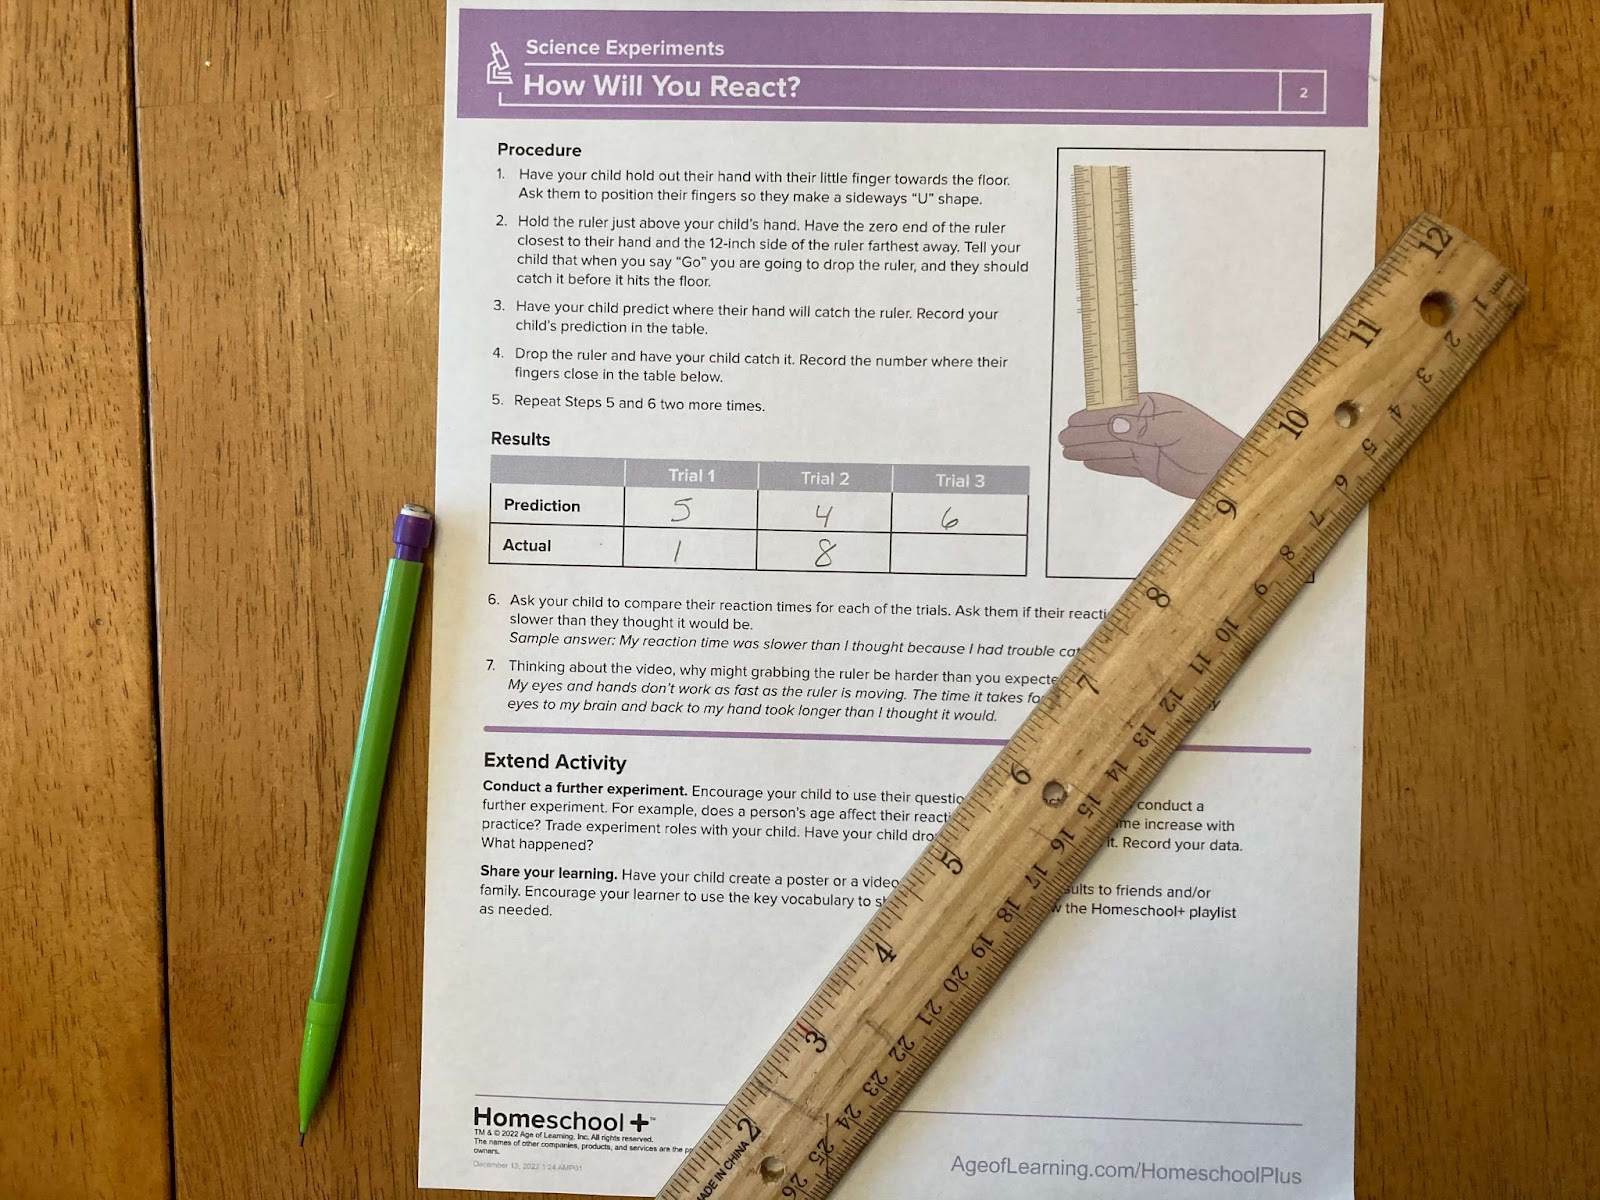 science experiment lesson plan from Homeschool+ Online Learning Program